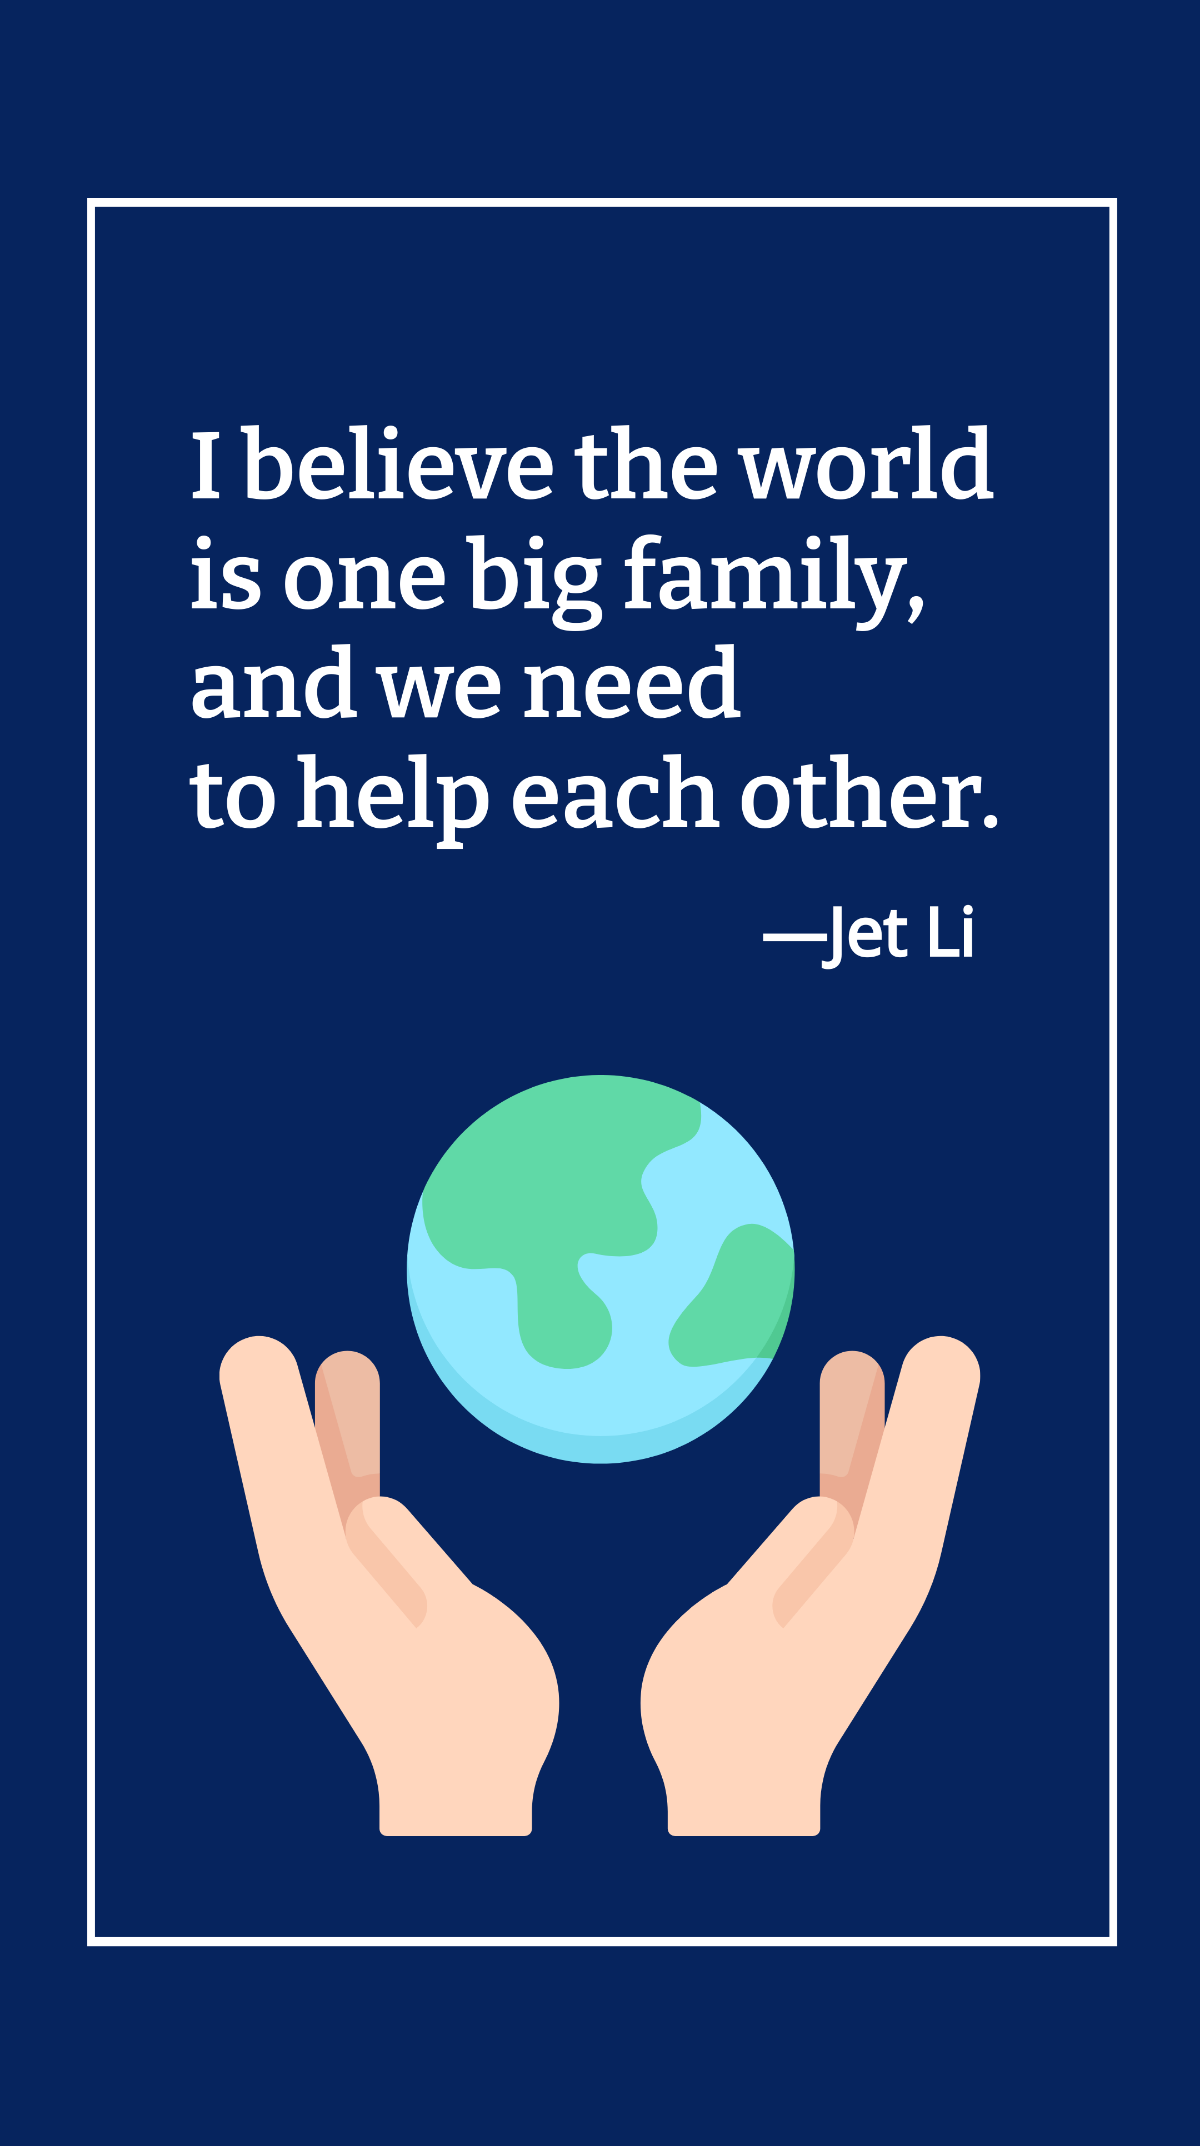 Jet Li - I believe the world is one big family, and we need to help each other. Template